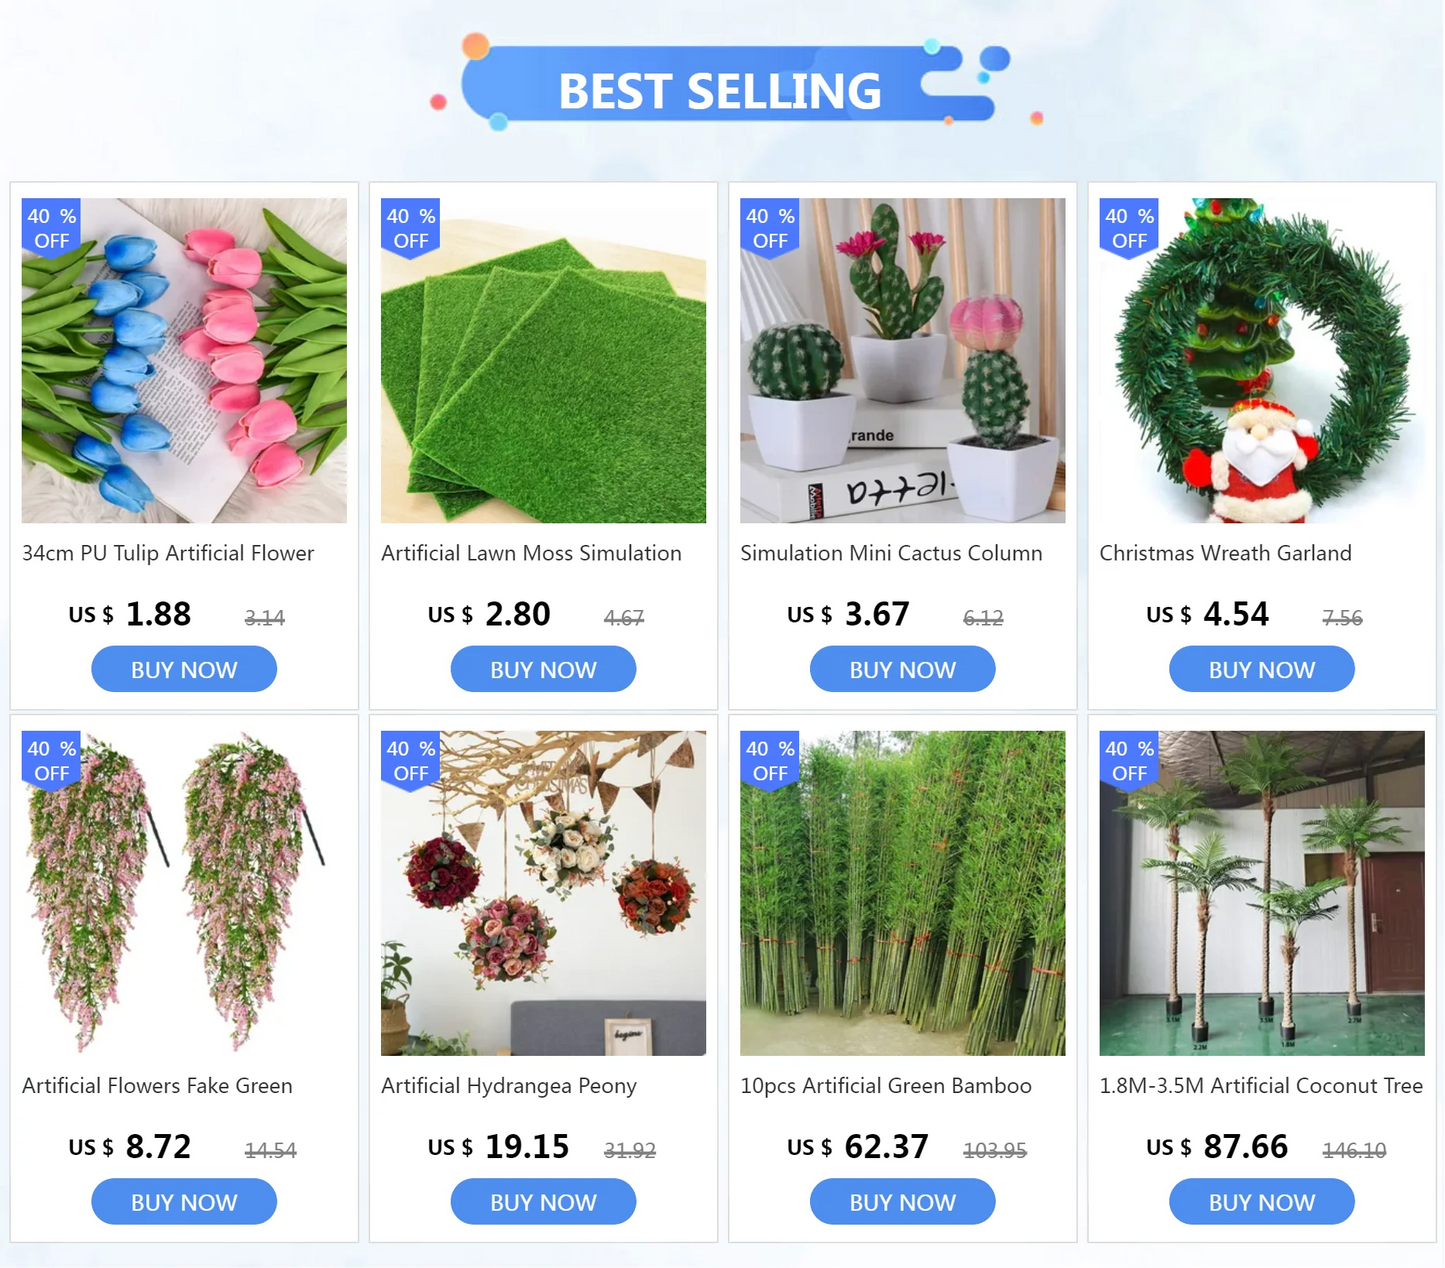 Artificial Evergreen Christmas Tree Ornaments for Decor